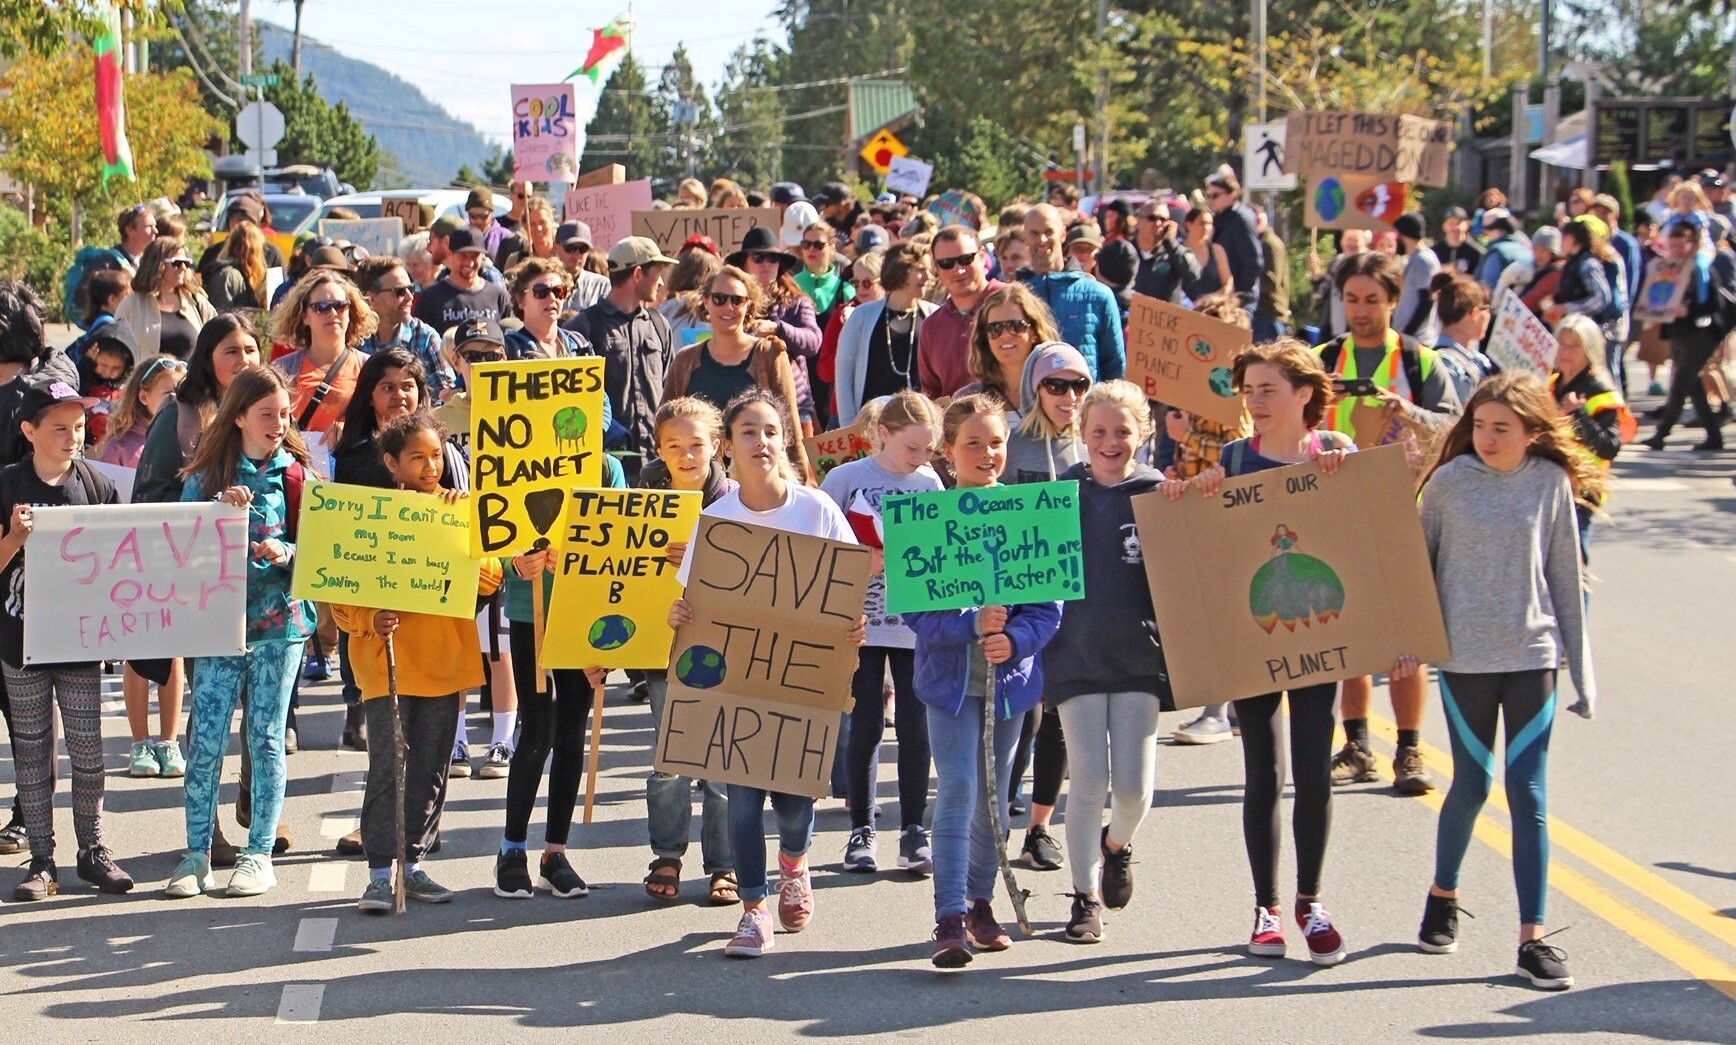 The Global Climate Strike Week actions from September 20-27 saw millions of people take to the streets and strike for climate action. In the Pacific Rim, hundreds participated in youth led actions in Tofino and Ucluelet to adoca April 18, 1950 – July 17, 2019 te for all governments to act to reduce carbon emissions at least 50% by 2030. #GLOBALCLIMATESTRIKE #ENDFOSSILFUELSUBSIDIESNOW